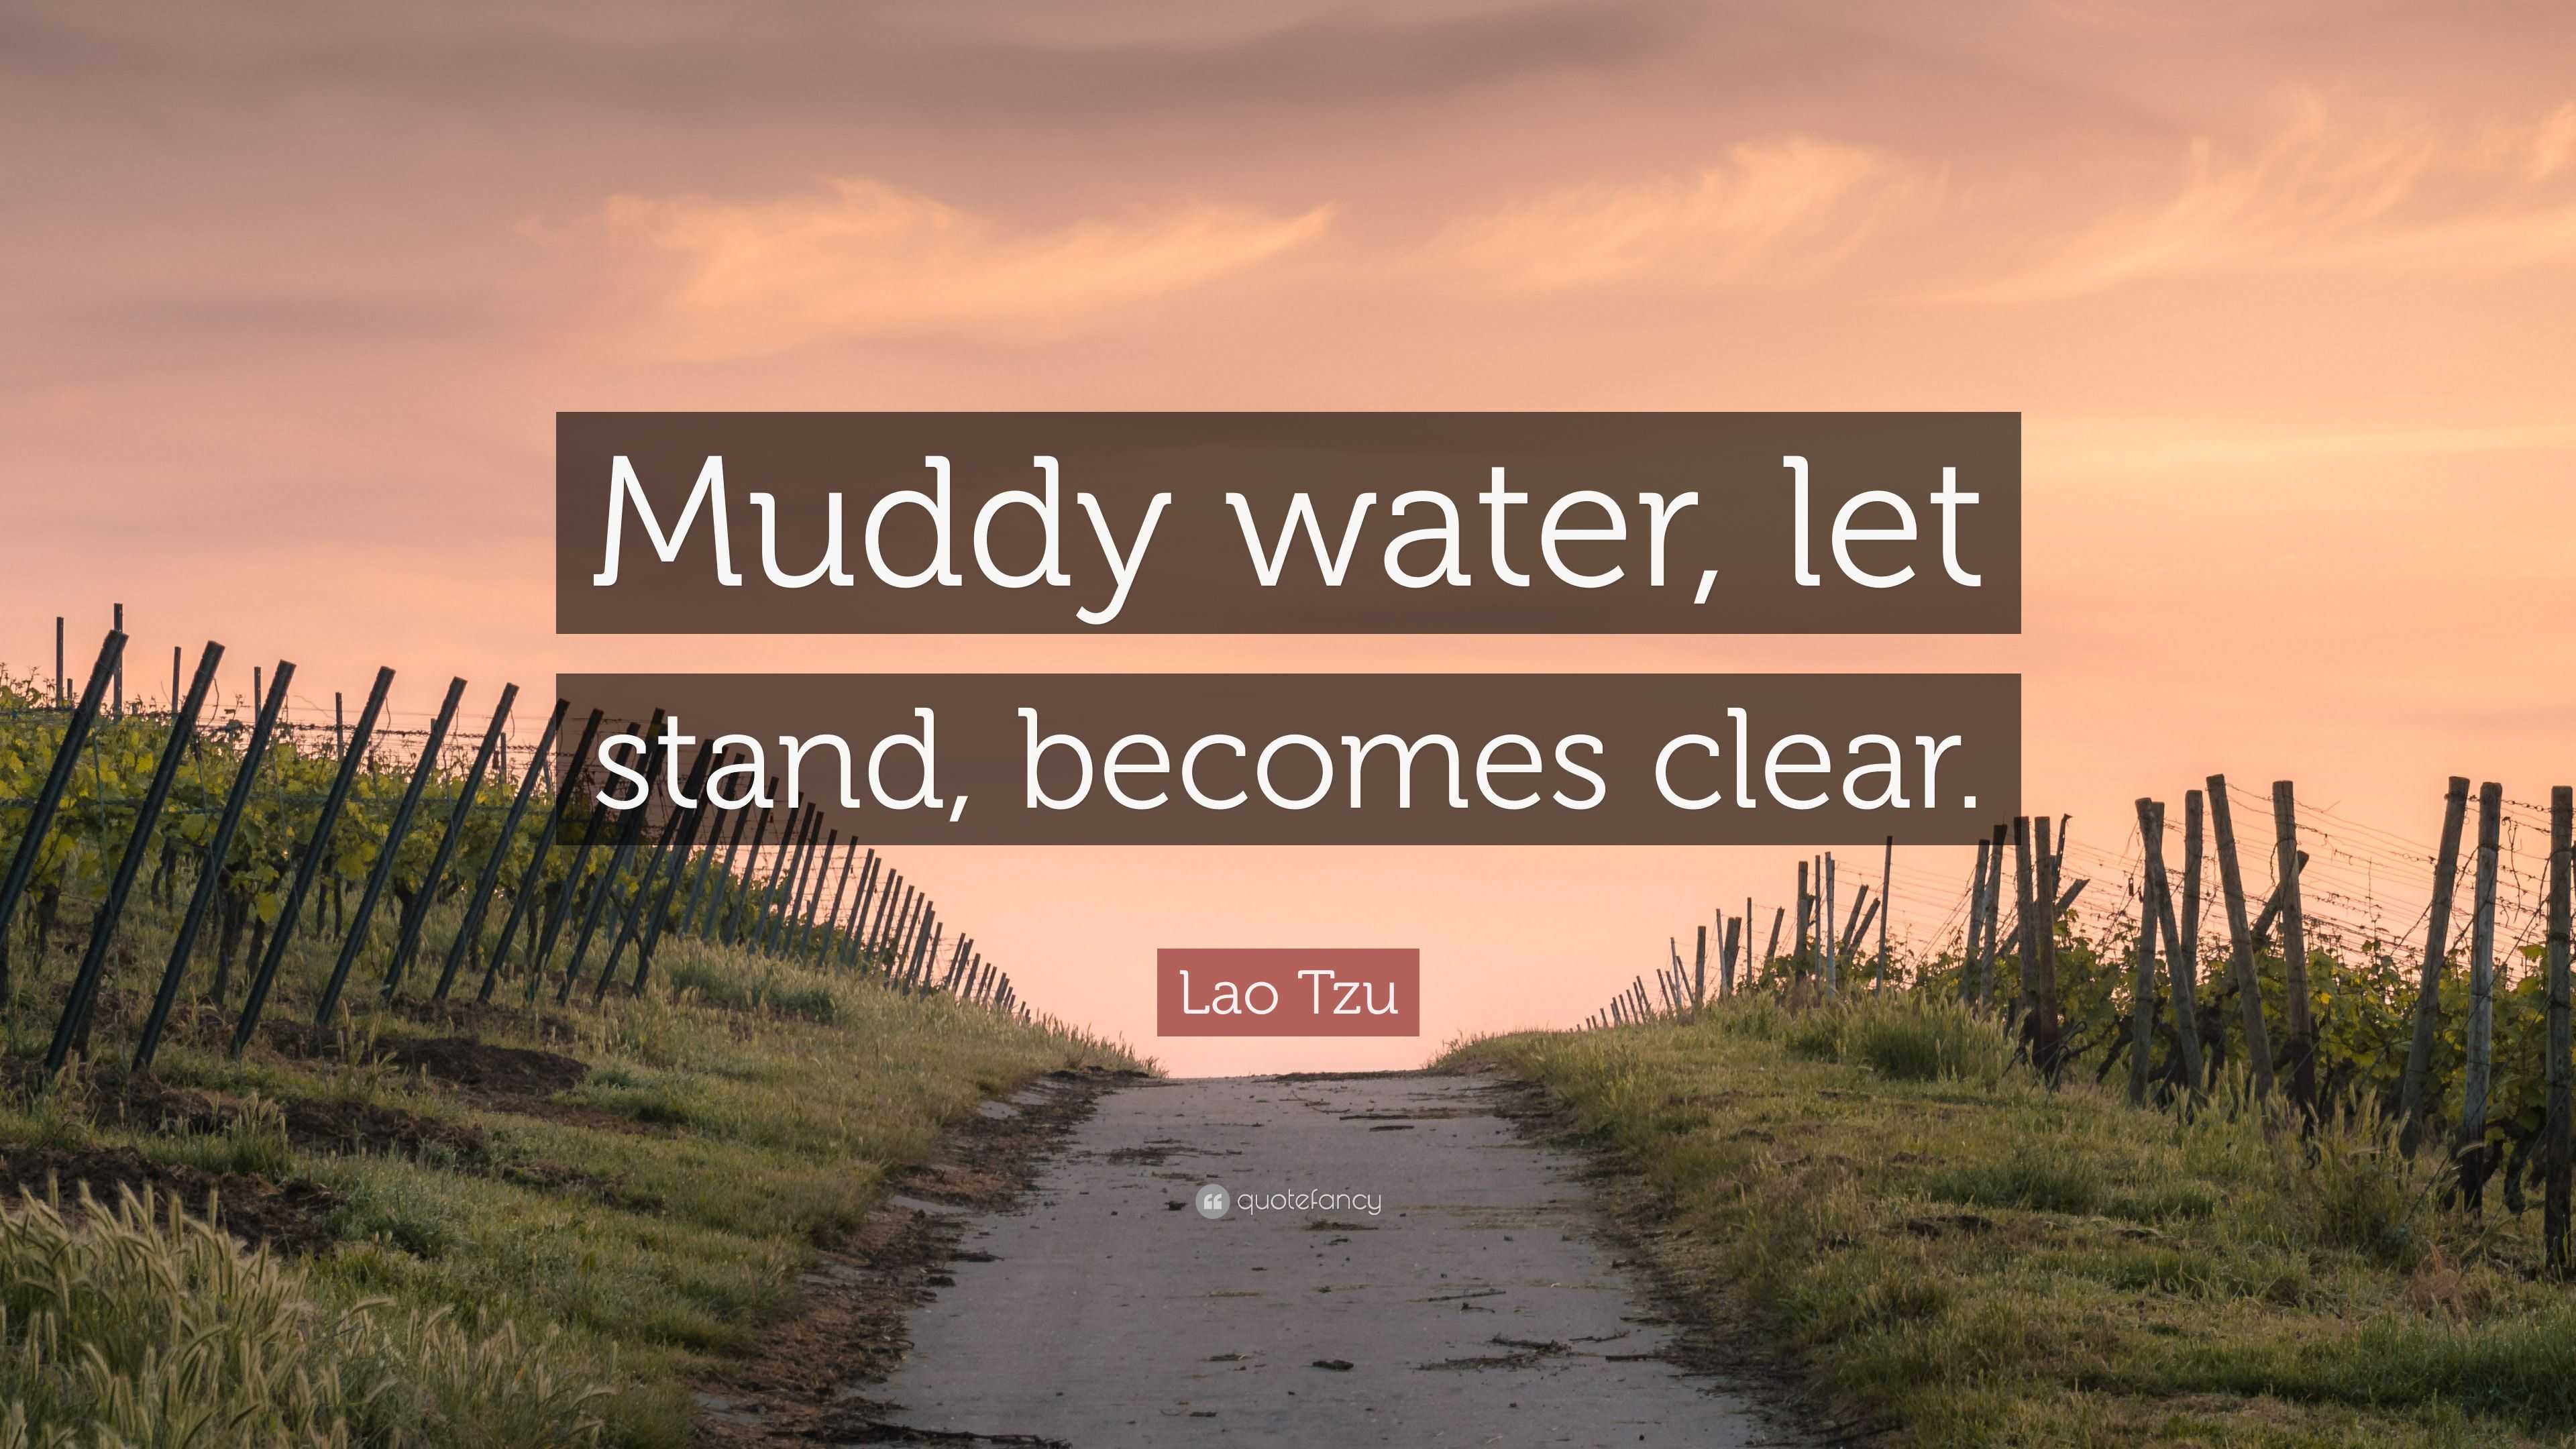 Lao Tzu Quote: "Muddy water, let stand, becomes clear." (12 wallpapers) - Quotefancy